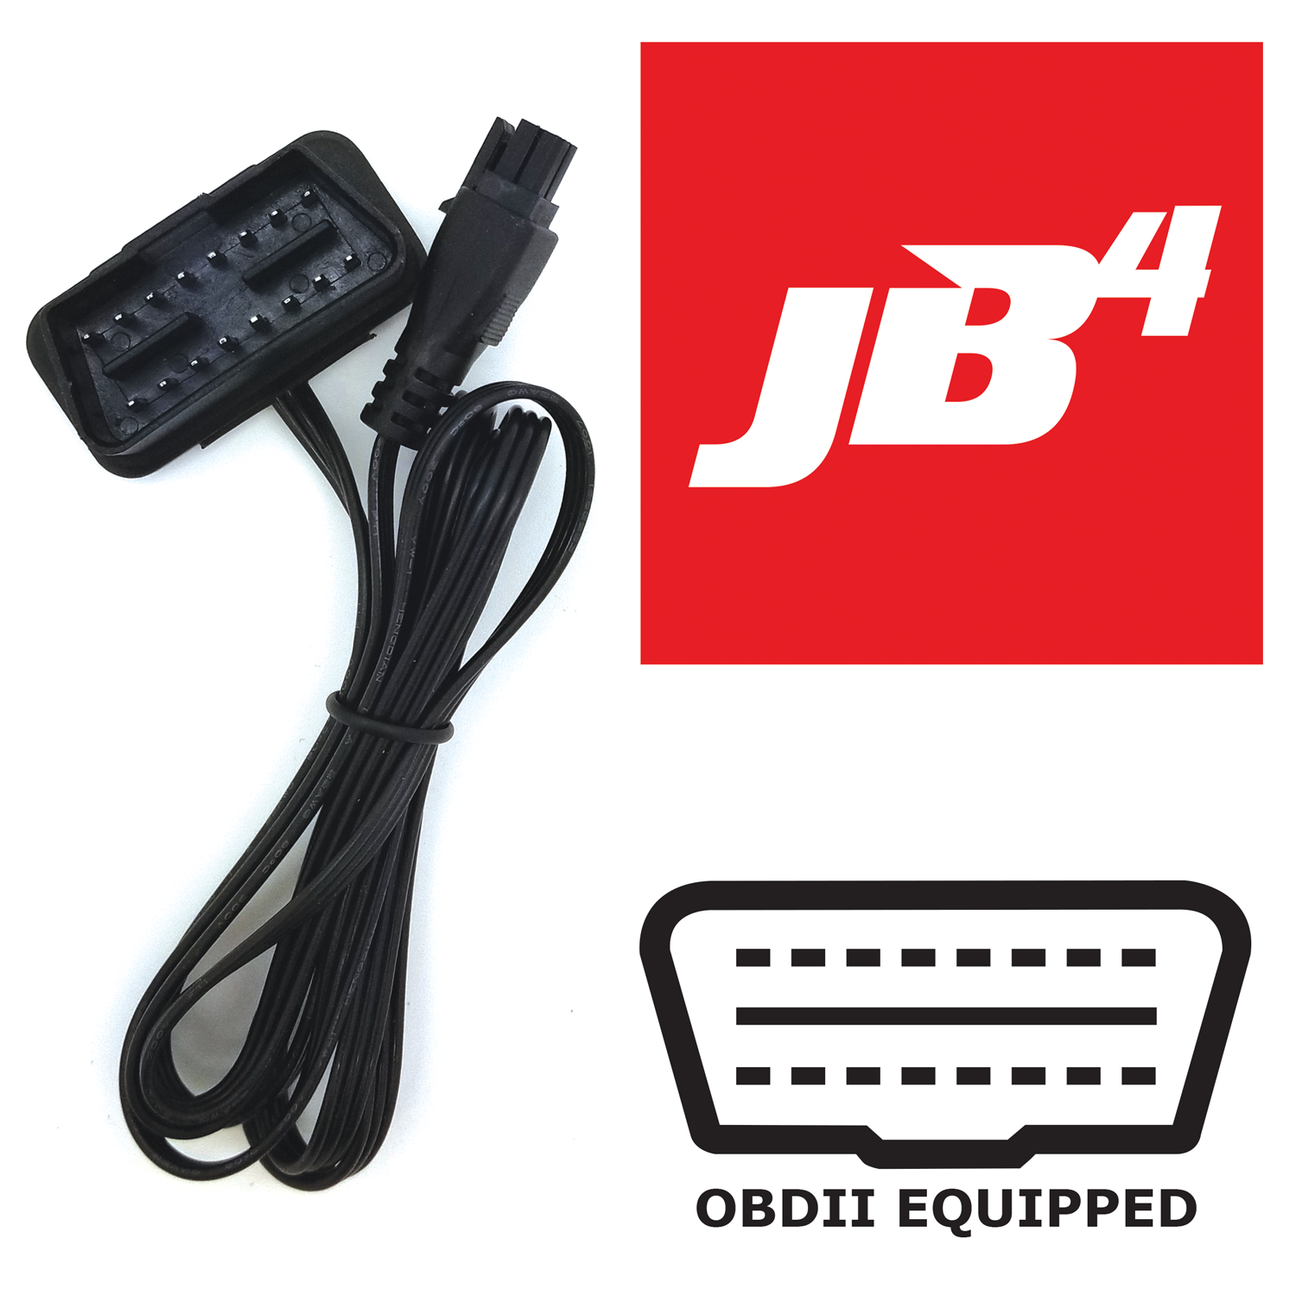 JB4 Tuner for Subaru WRX, Ascent, Legacy, & Outback - 0